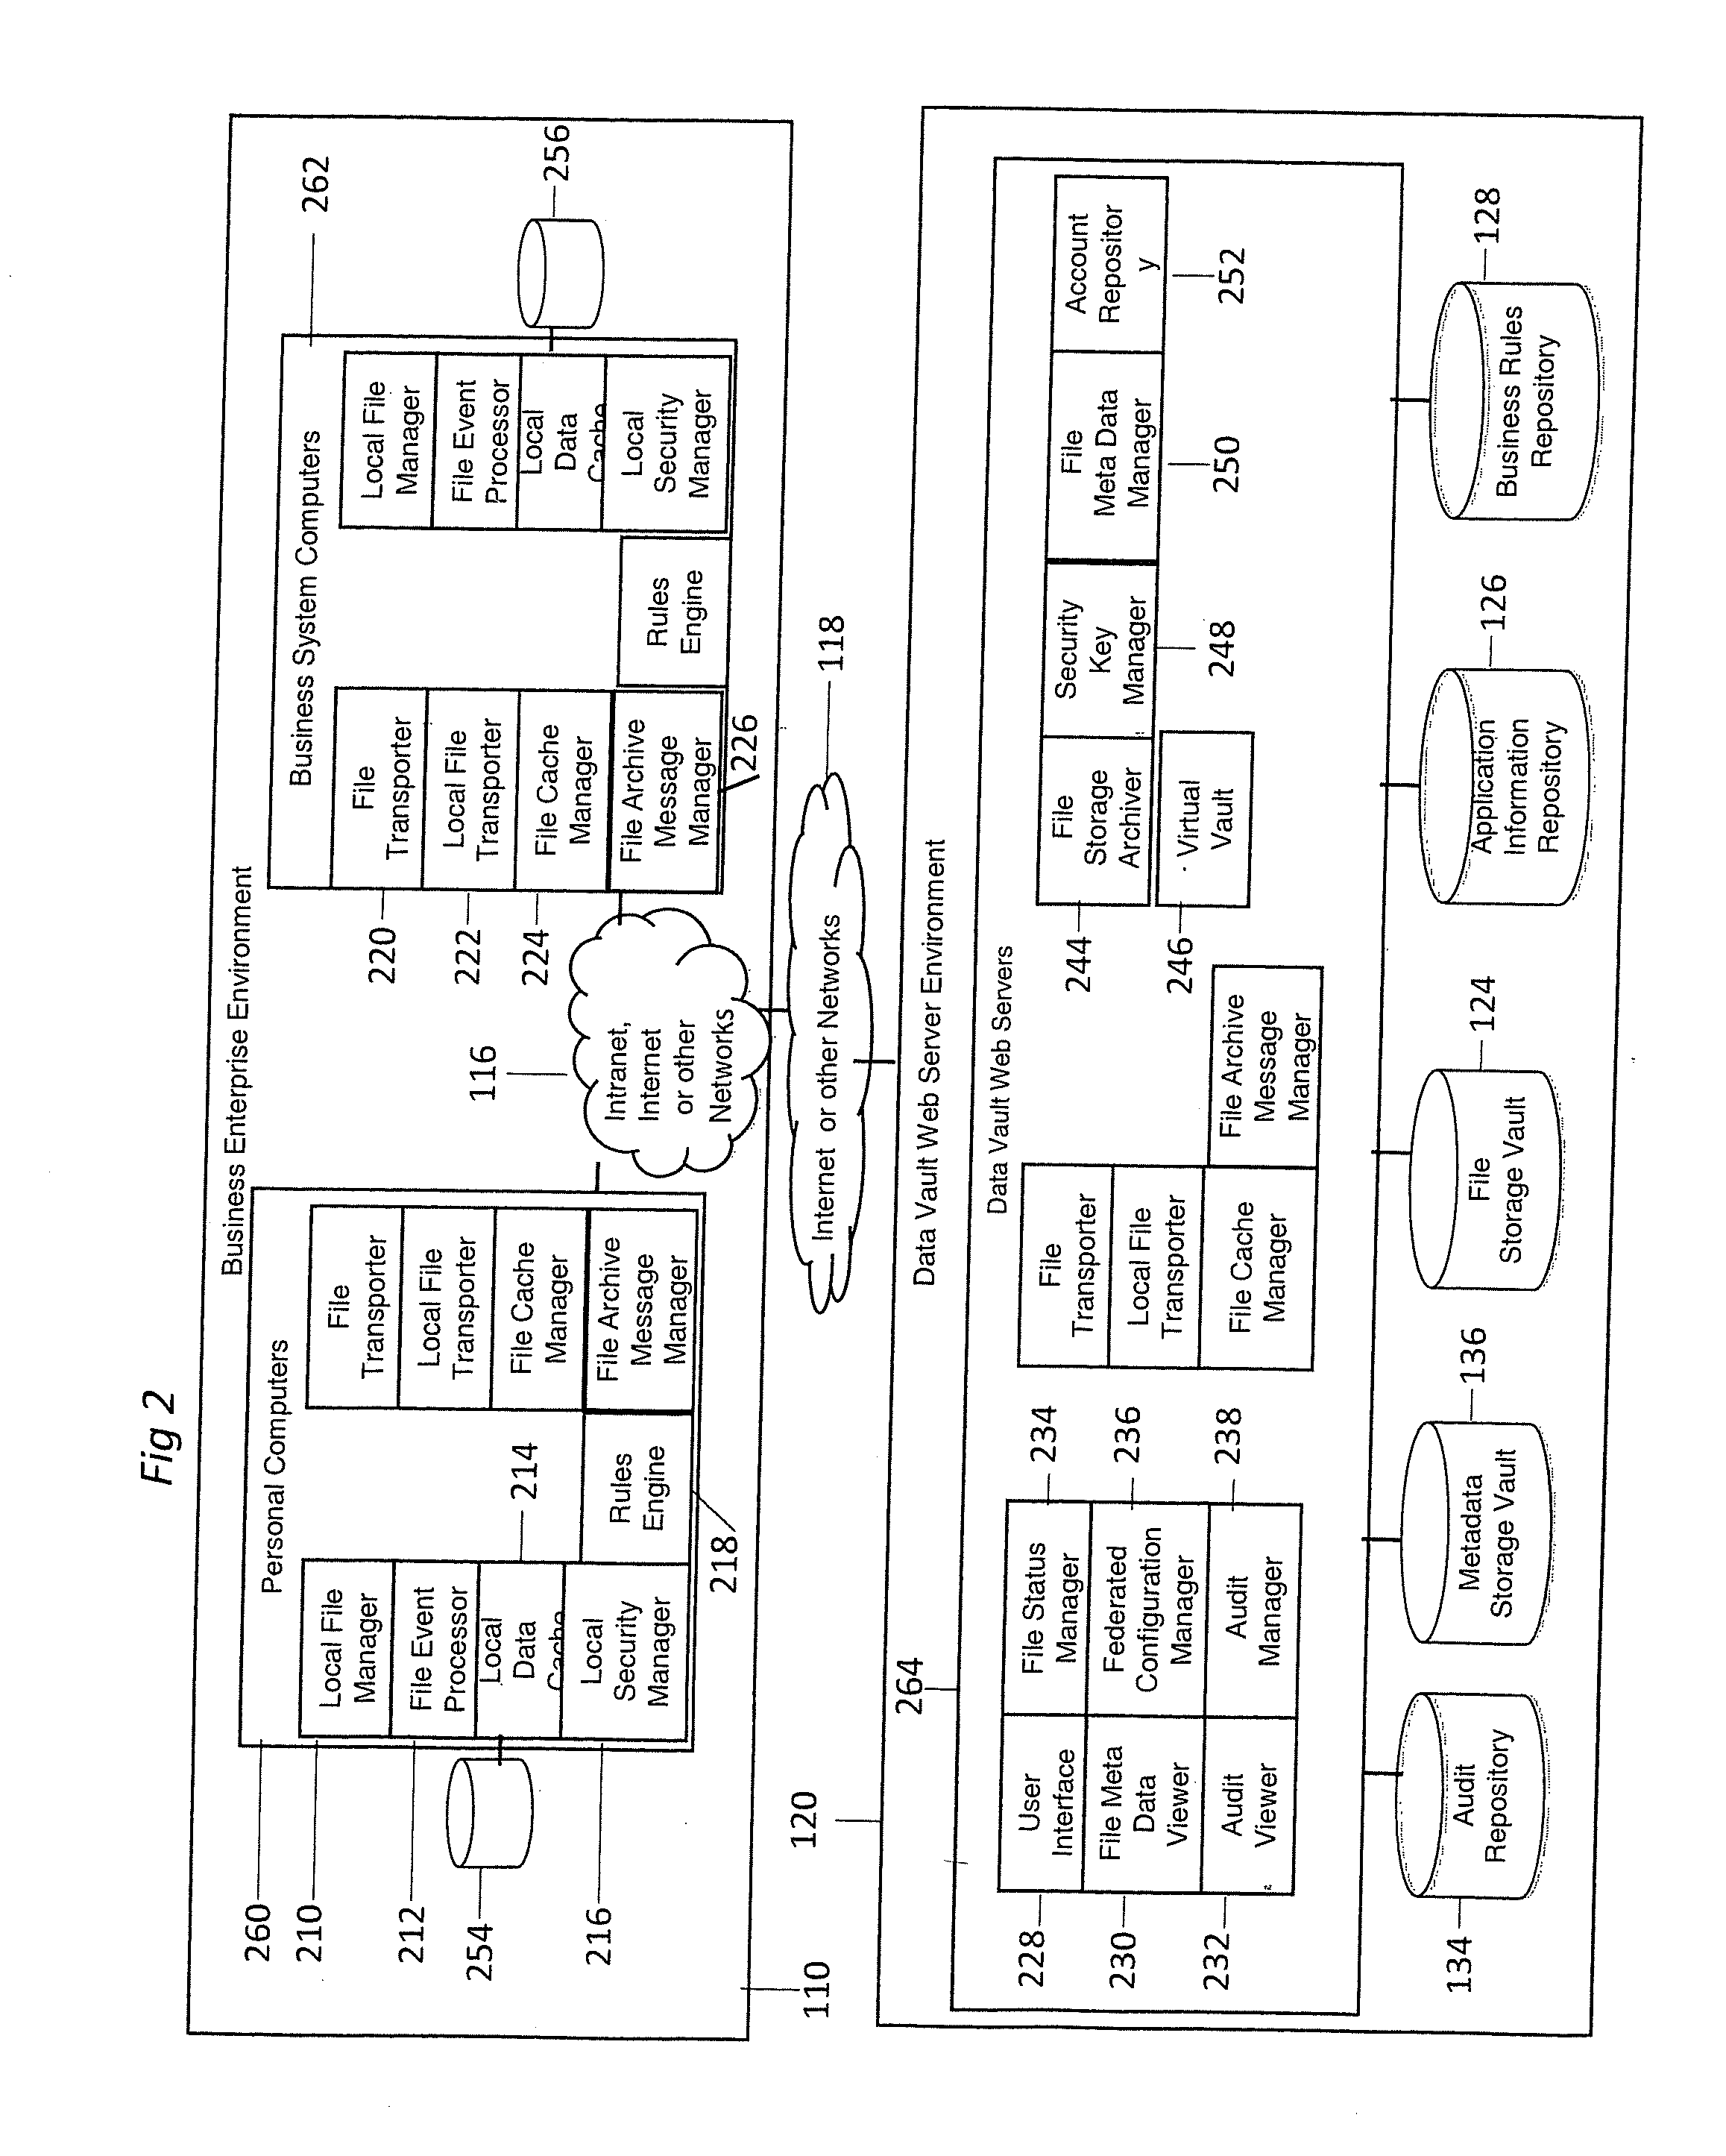 System and method for providing automated electronic information backup, storage and recovery